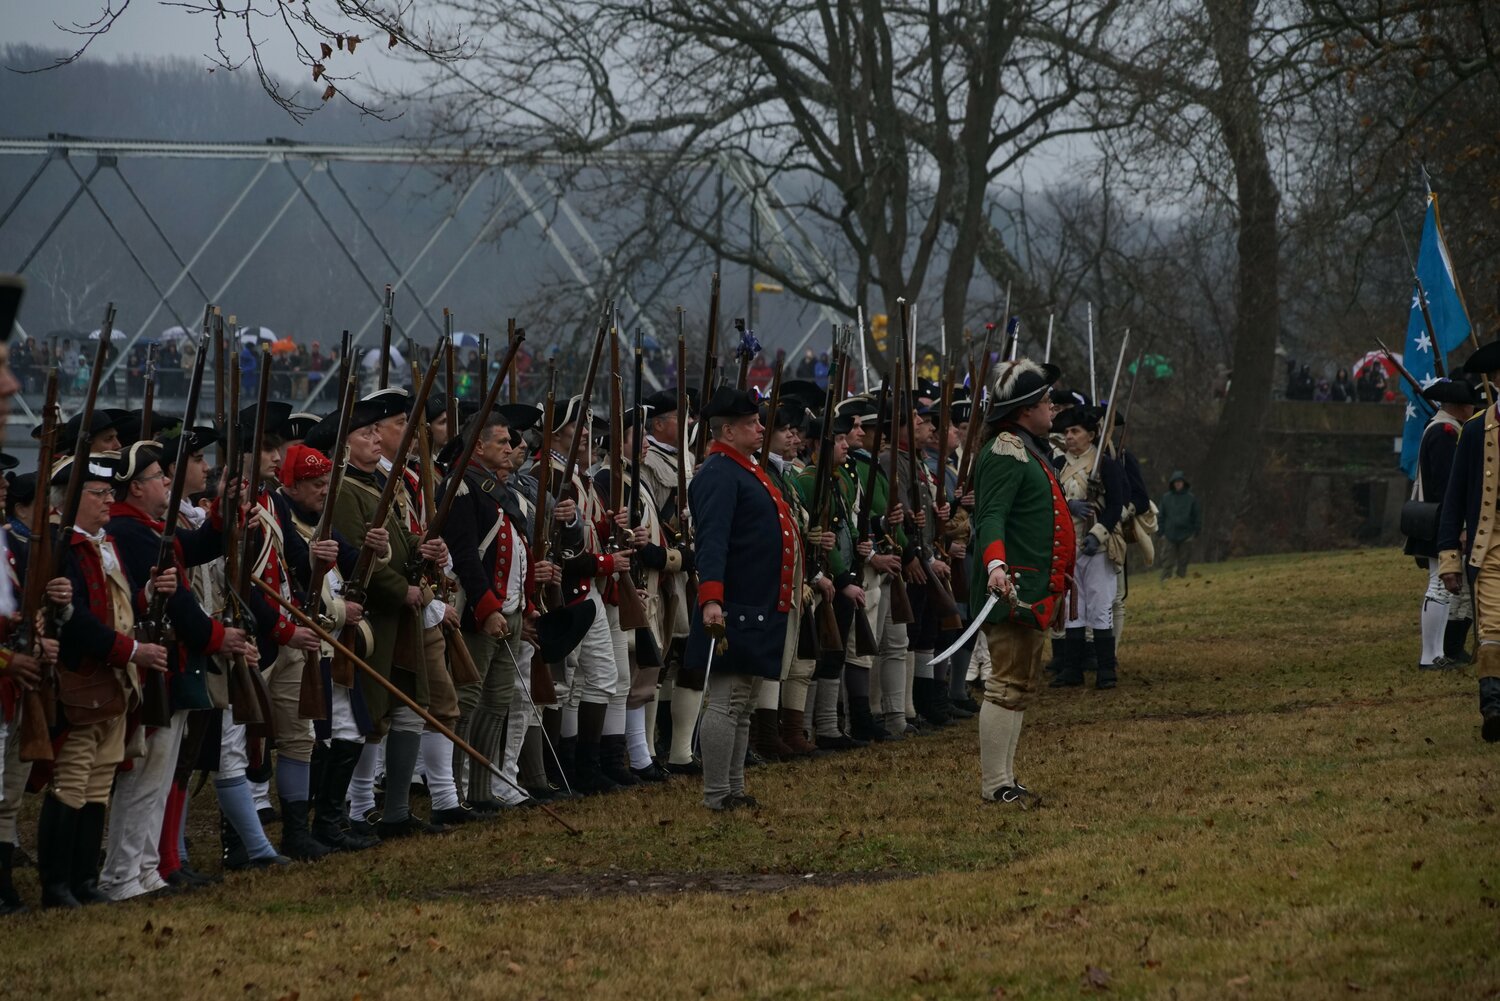 Sunday’s reenactment involved hundreds of participants in Continental military dress.